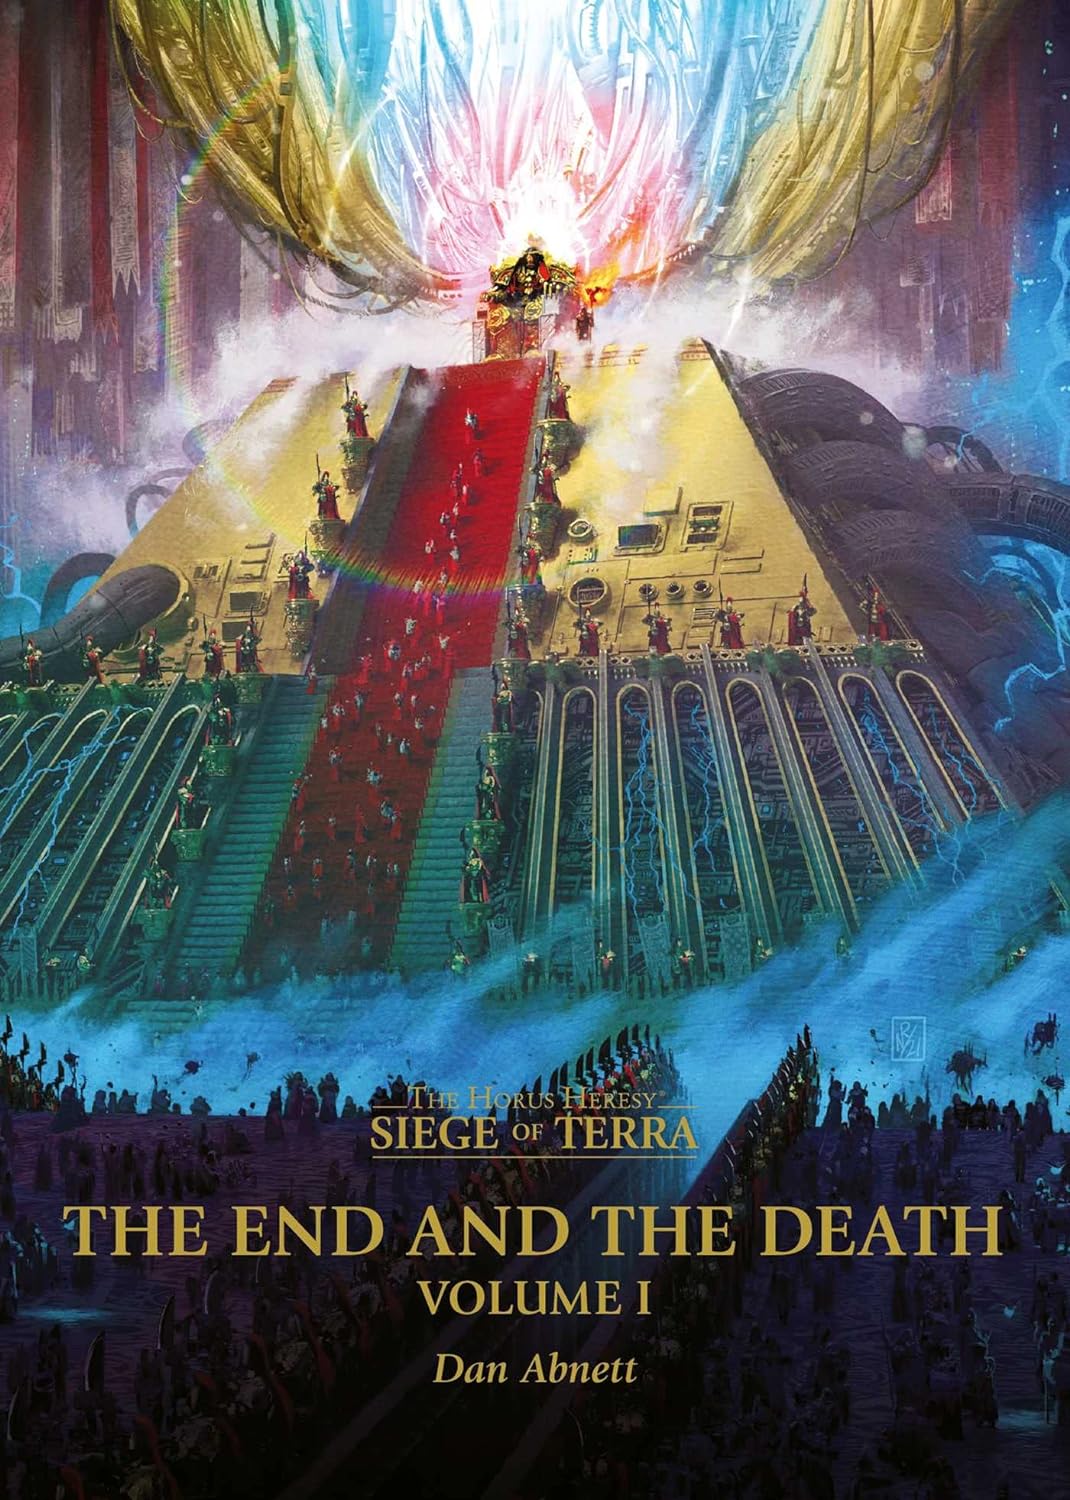 The End and the Death